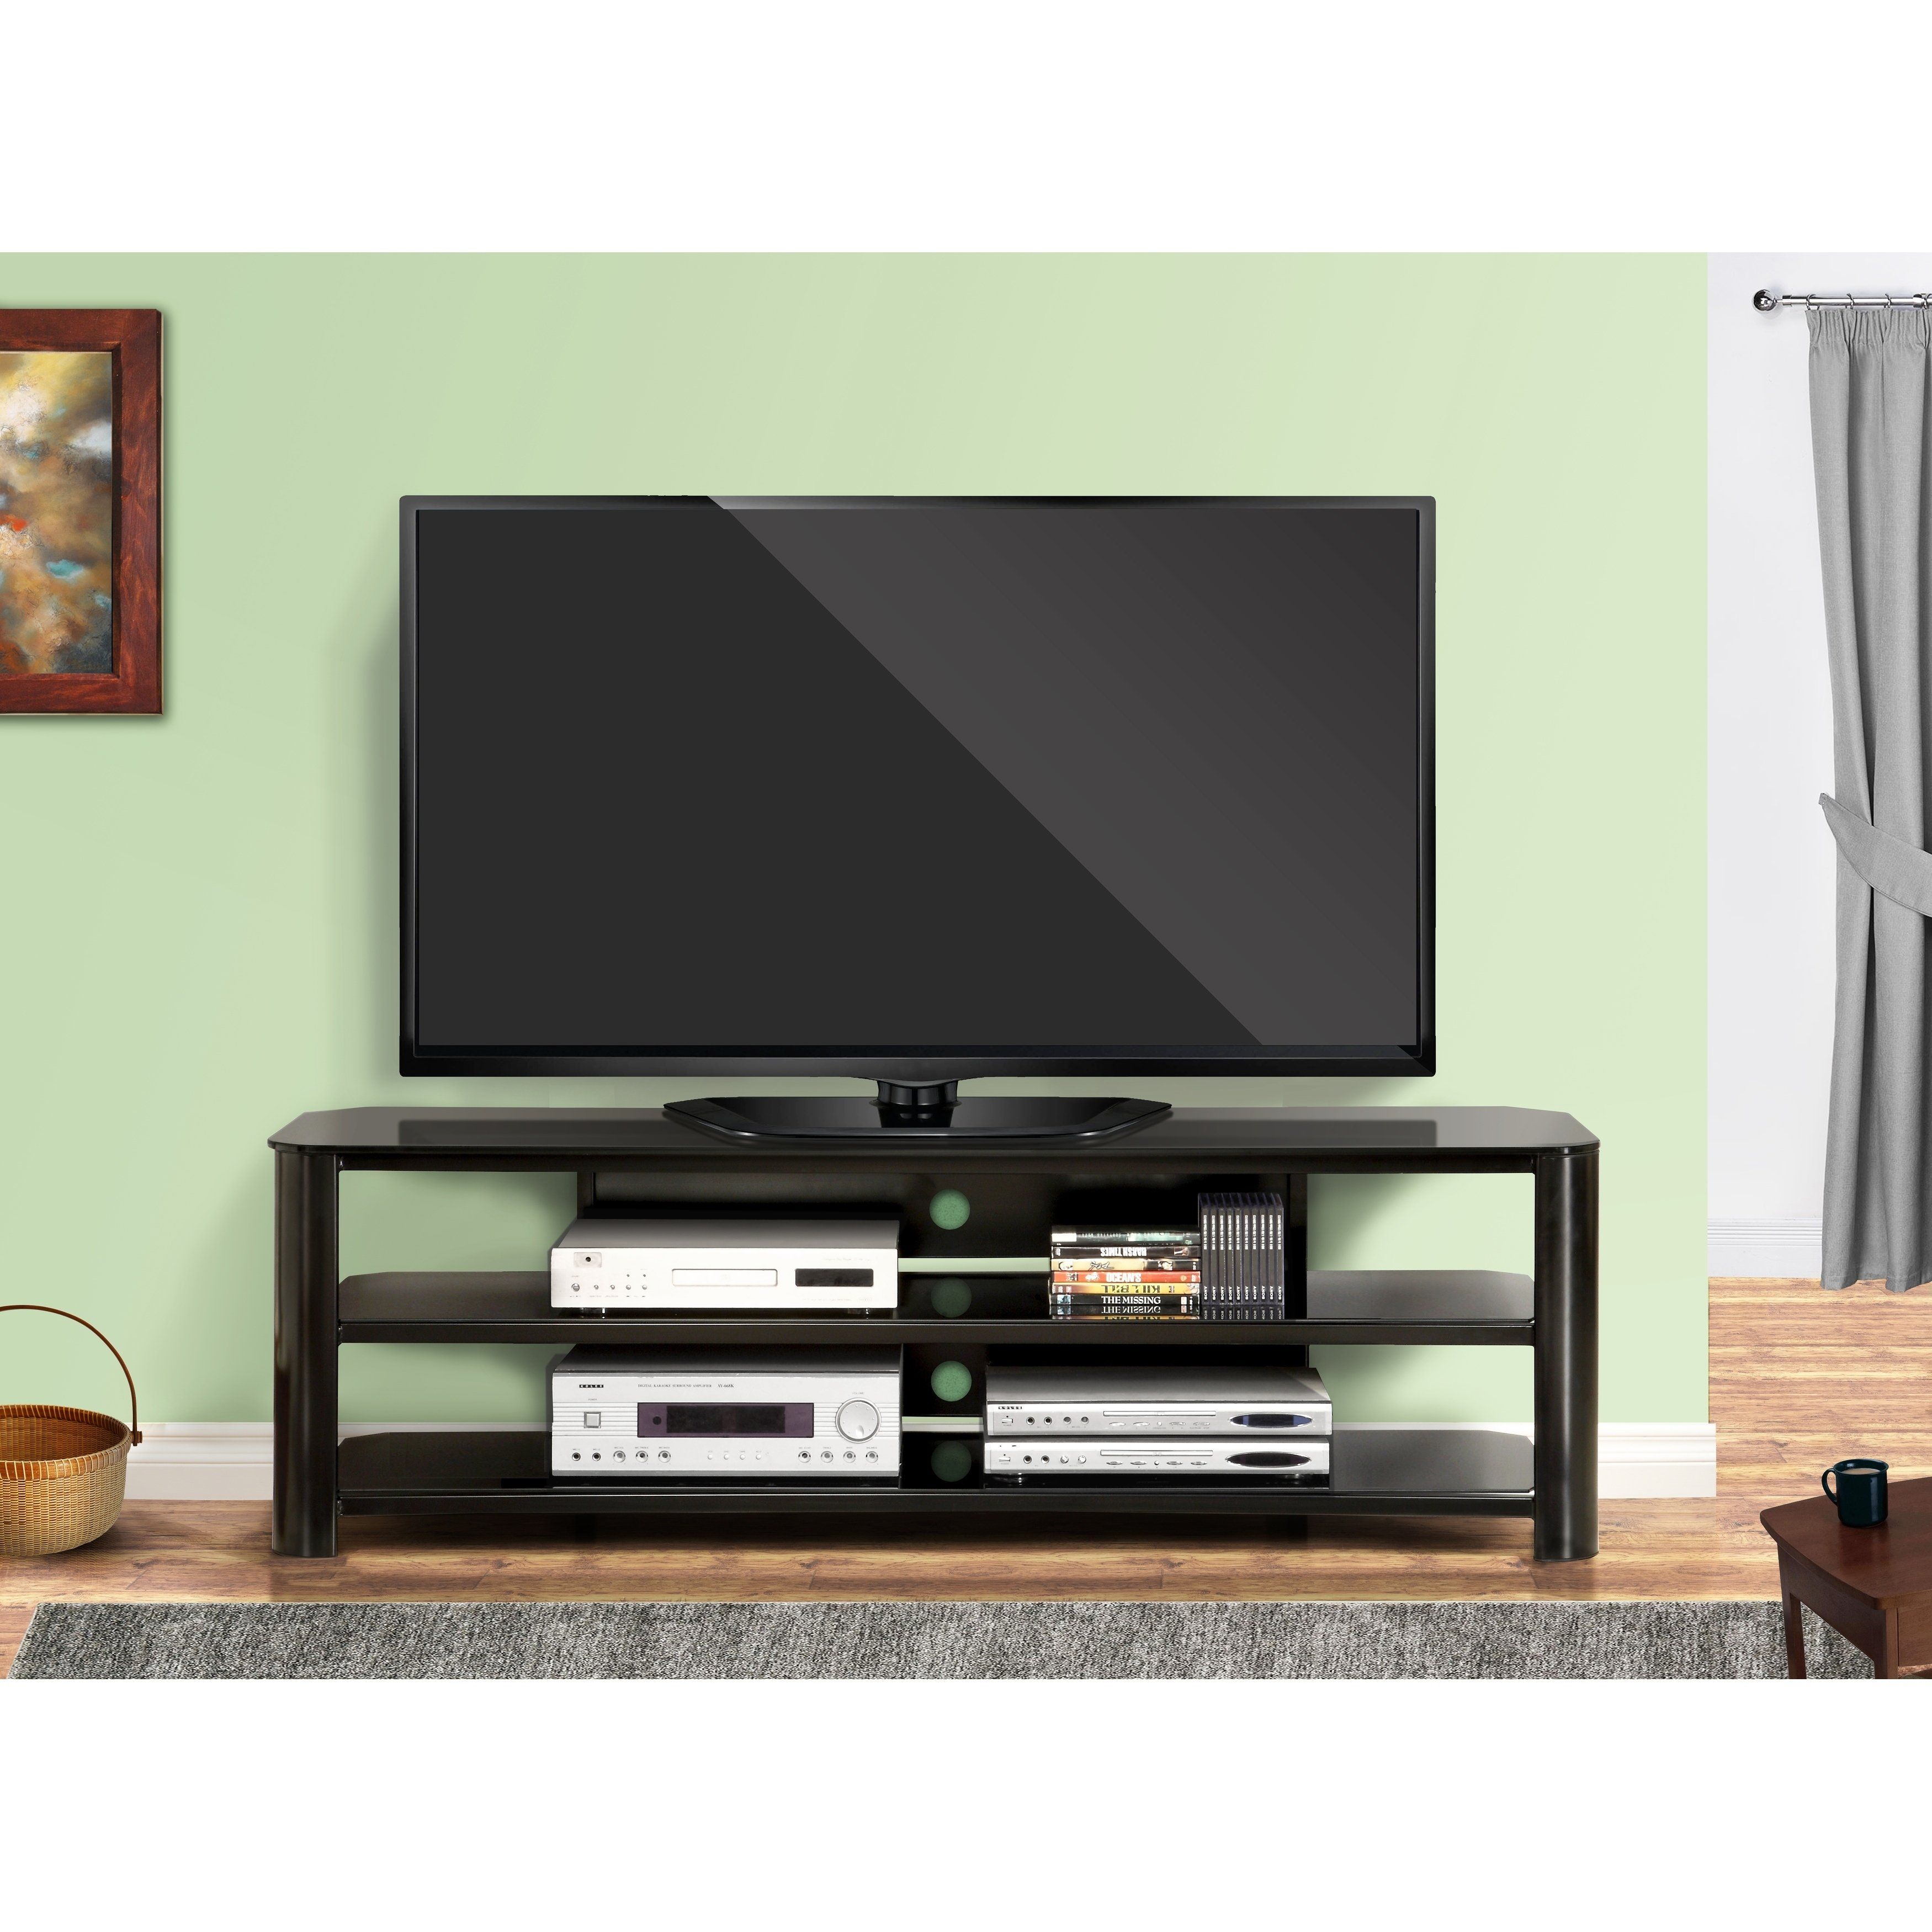 Shop Fold 'n' Snap Oxford Ez Black Innovex Tv Stand – Free Shipping Regarding Oxford 70 Inch Tv Stands (View 22 of 30)